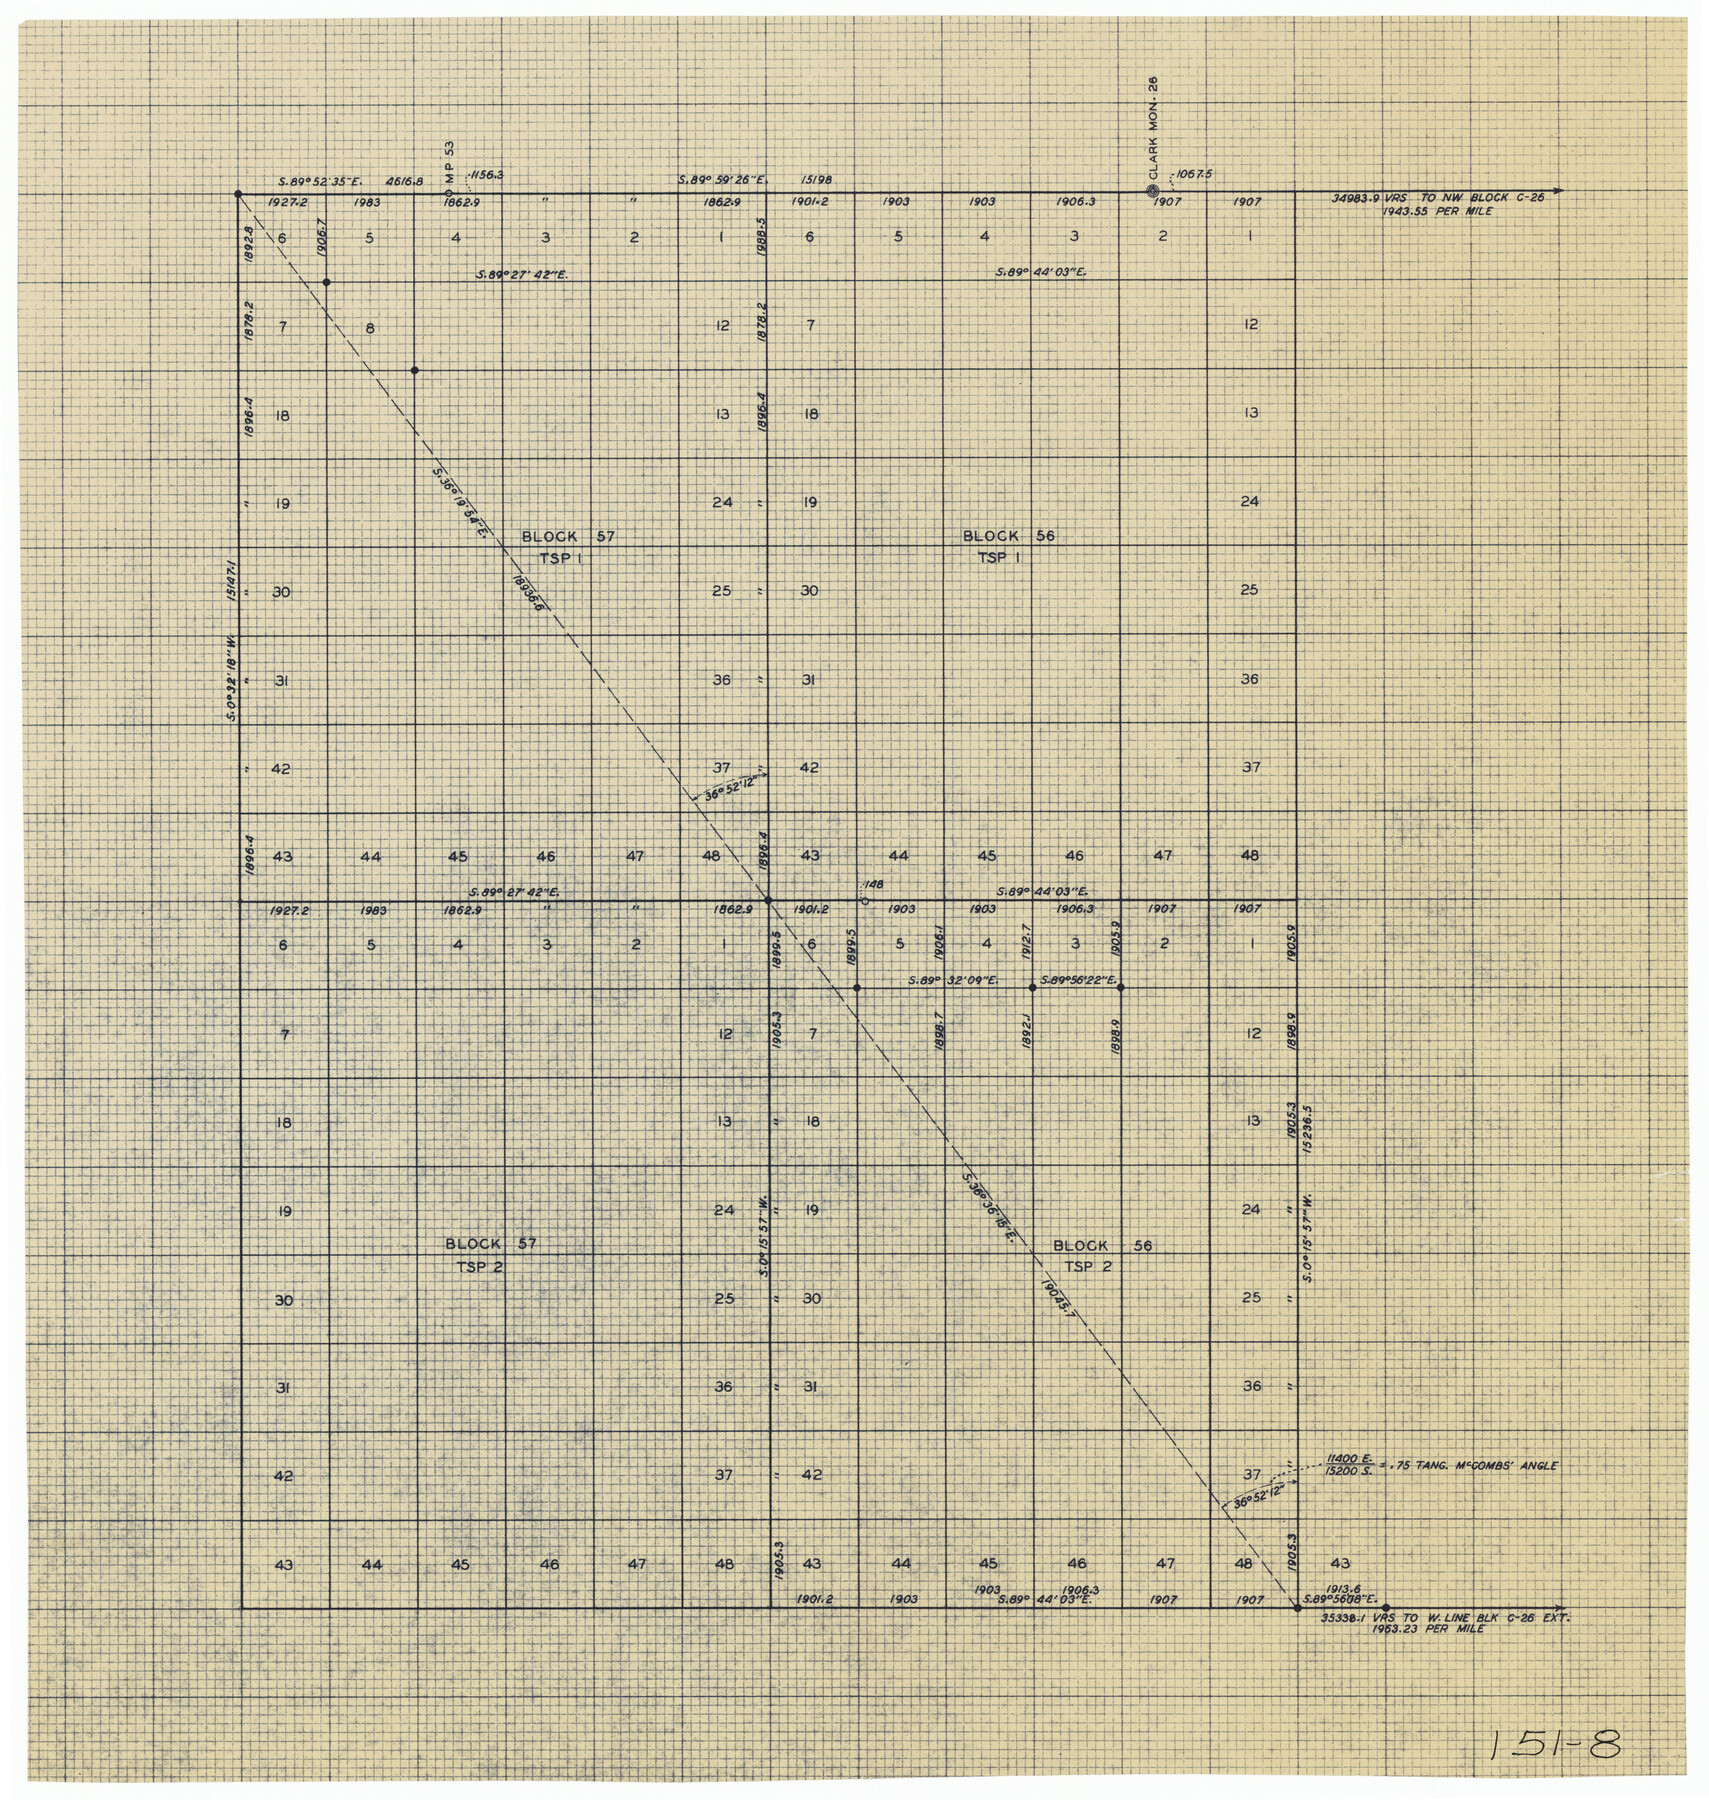 91315, [Blocks 56 and 57, Townships 1 and 2], Twichell Survey Records